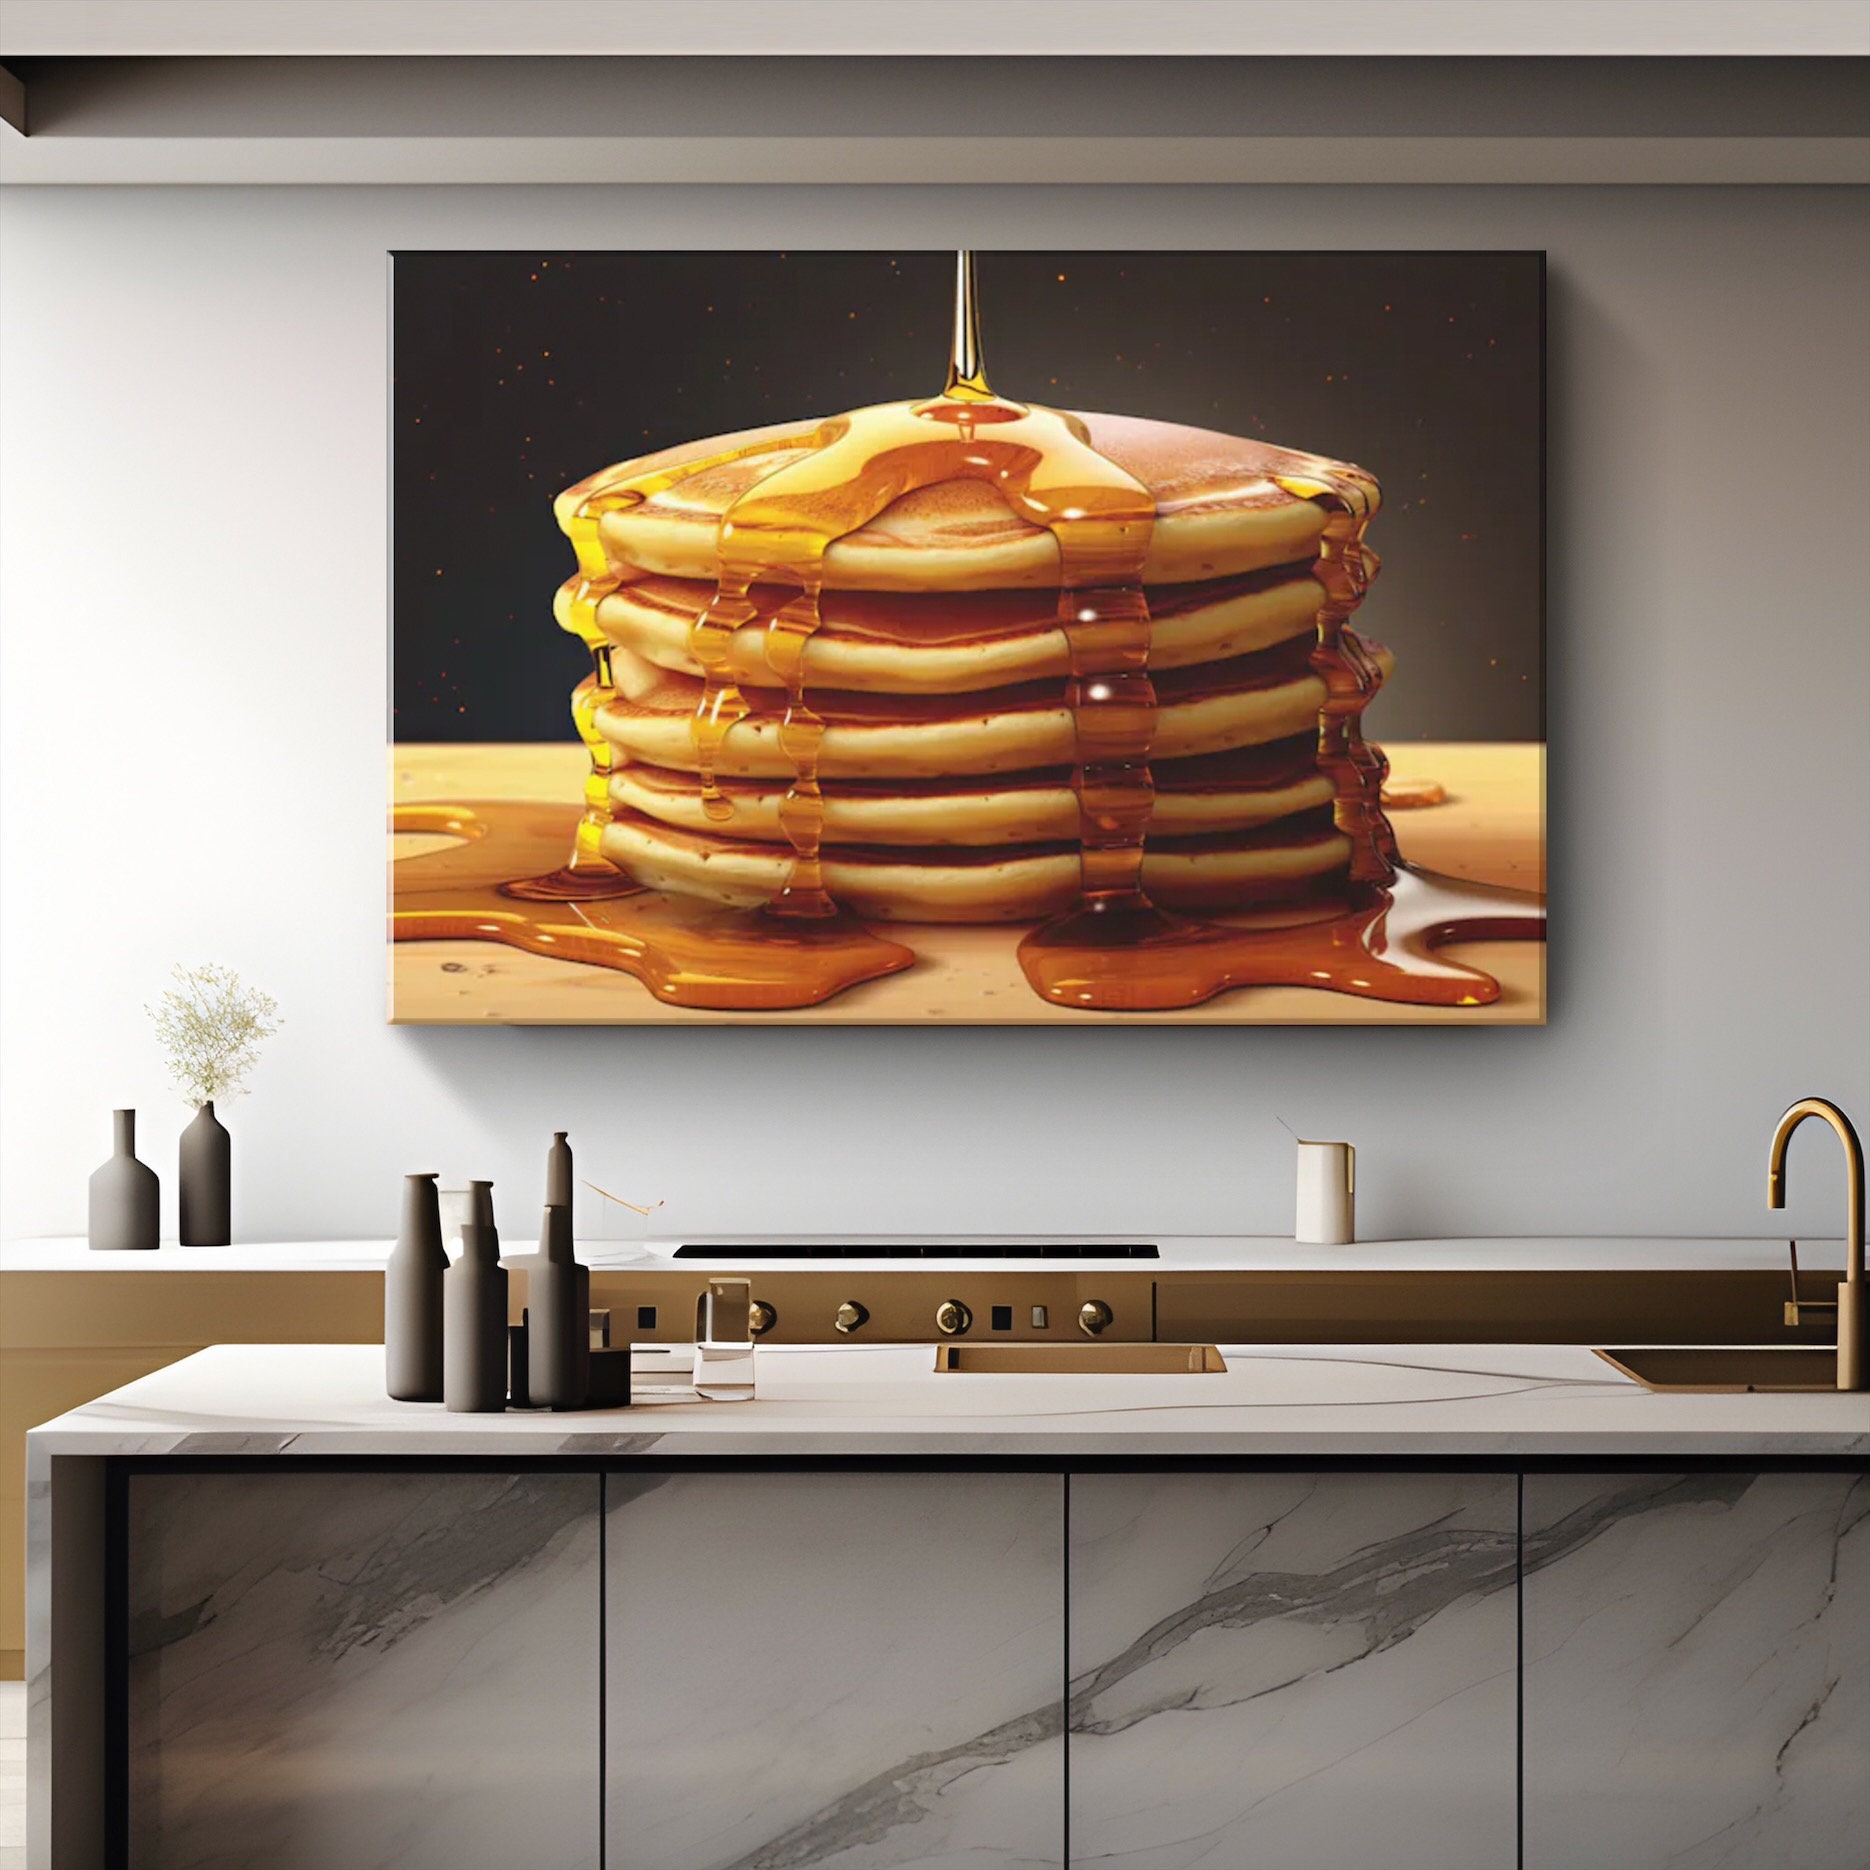  XYYDS Meme tapestry, The Rock Eating Pancakes Funny Small  Tapestry Boutique Wall Hanging Banner Party Flag Banner Wall Blanket For  Bedroom College Dorm Poster Decor 29x37 Inches